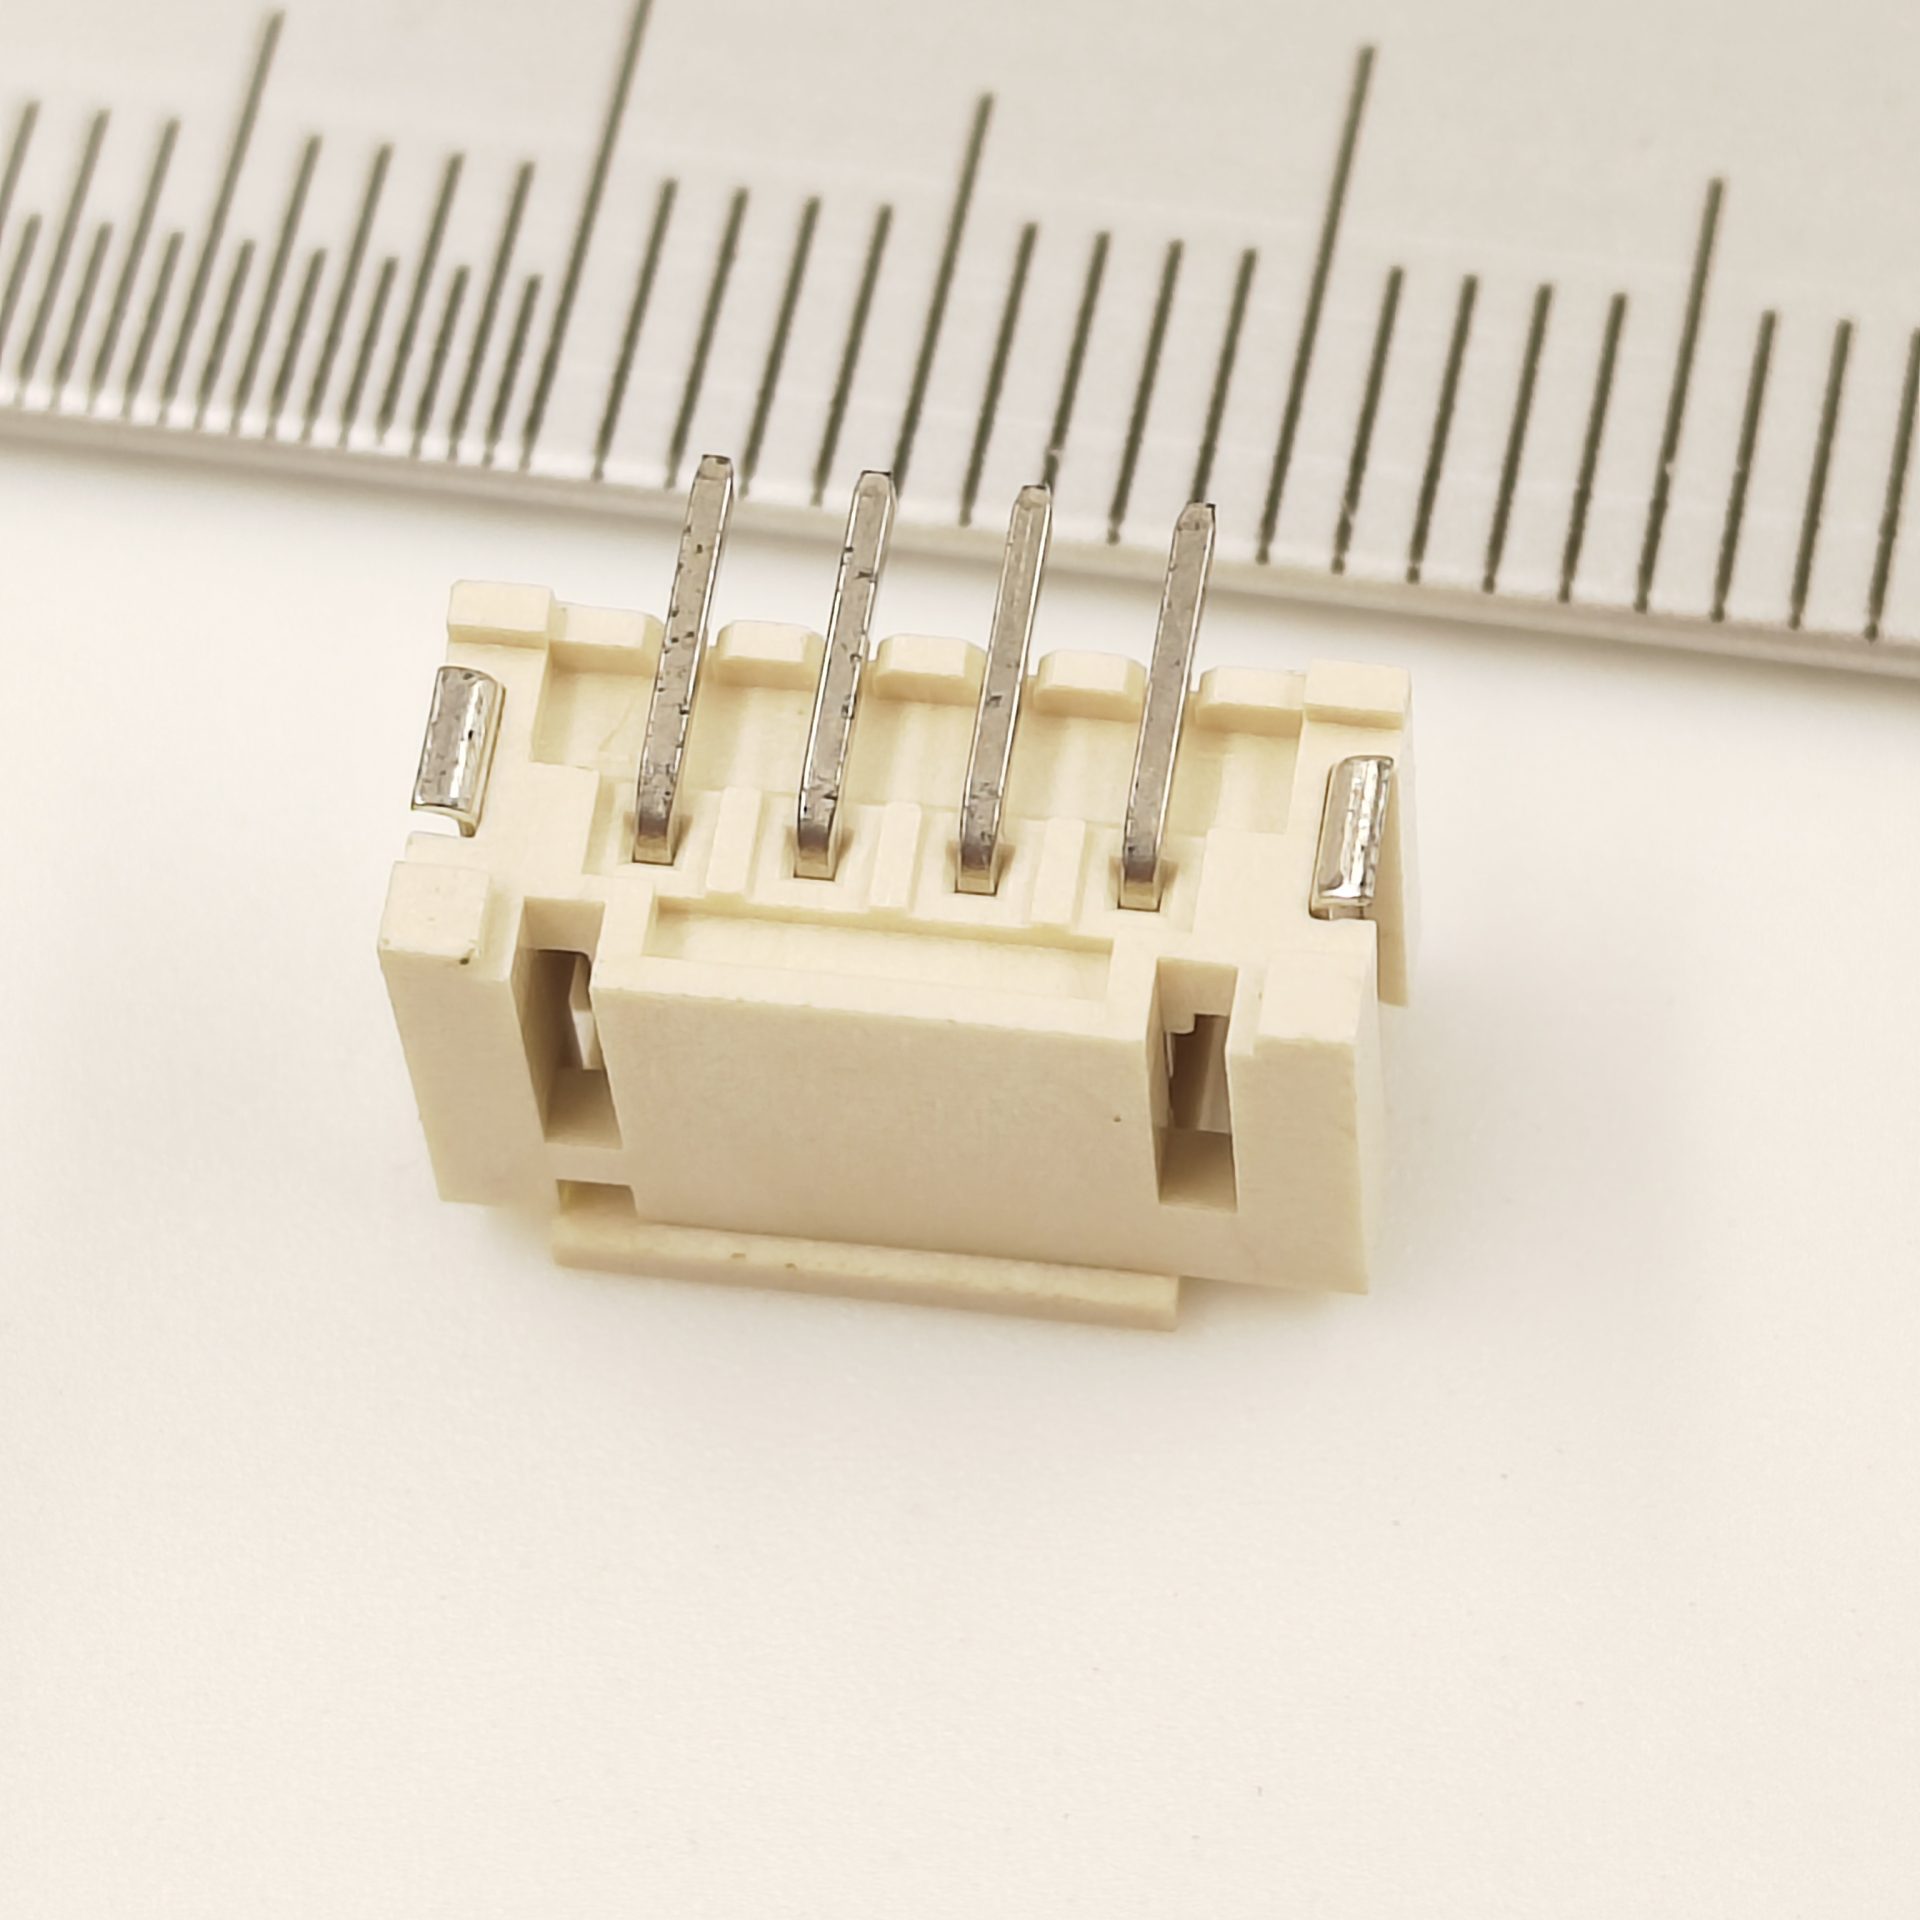 2MM Pitch Equivalent to JST Connector B4B-PH-SM4-TB(LF)(SN) Wire to Board Connector